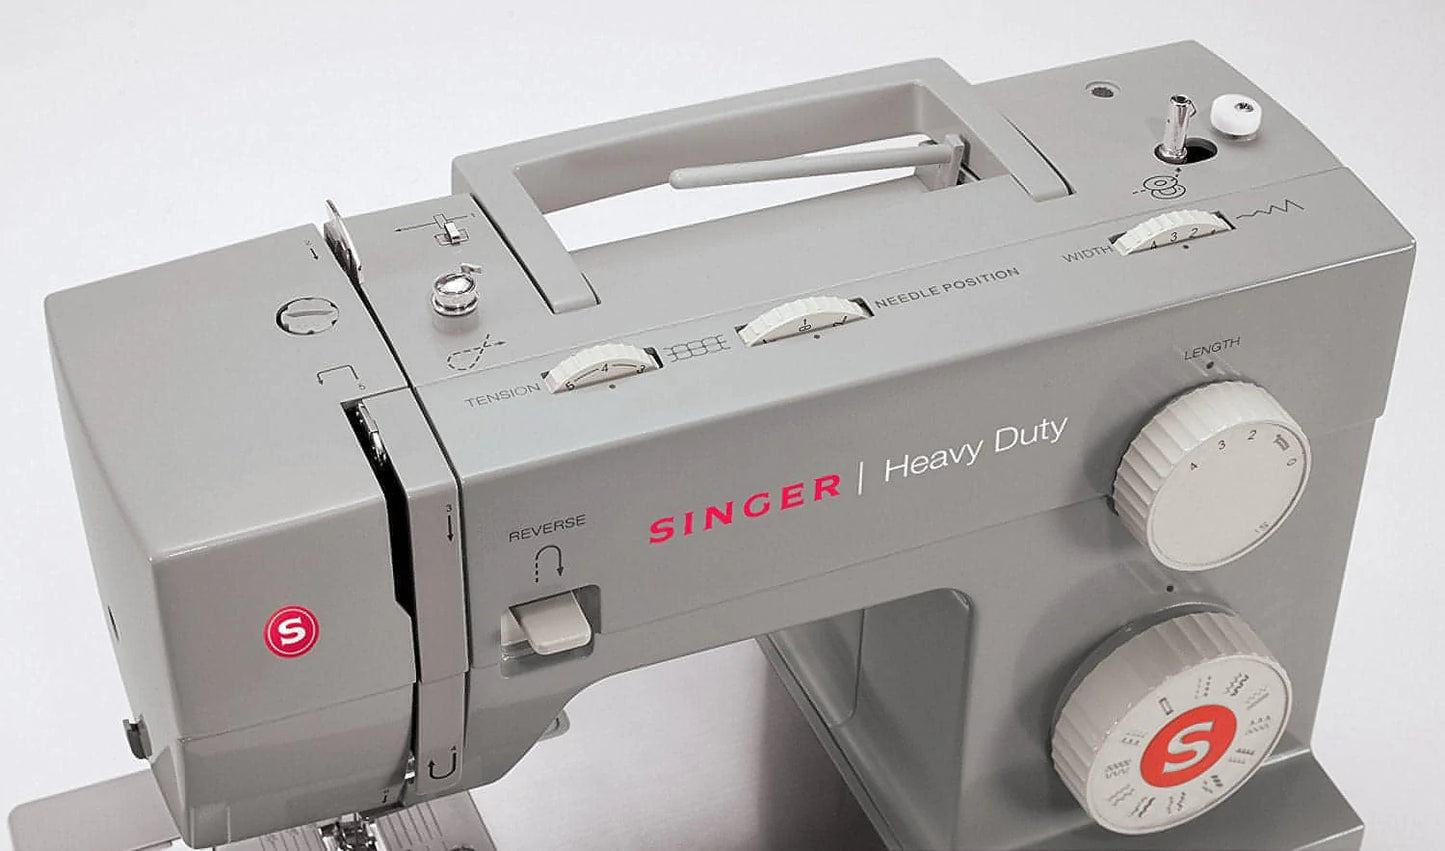 Singer Heavy Duty 4423 Sewing Machine - latest 2024 model with dual pulley system for maximum penetration power - FREE upgrade to 4432 on this offer